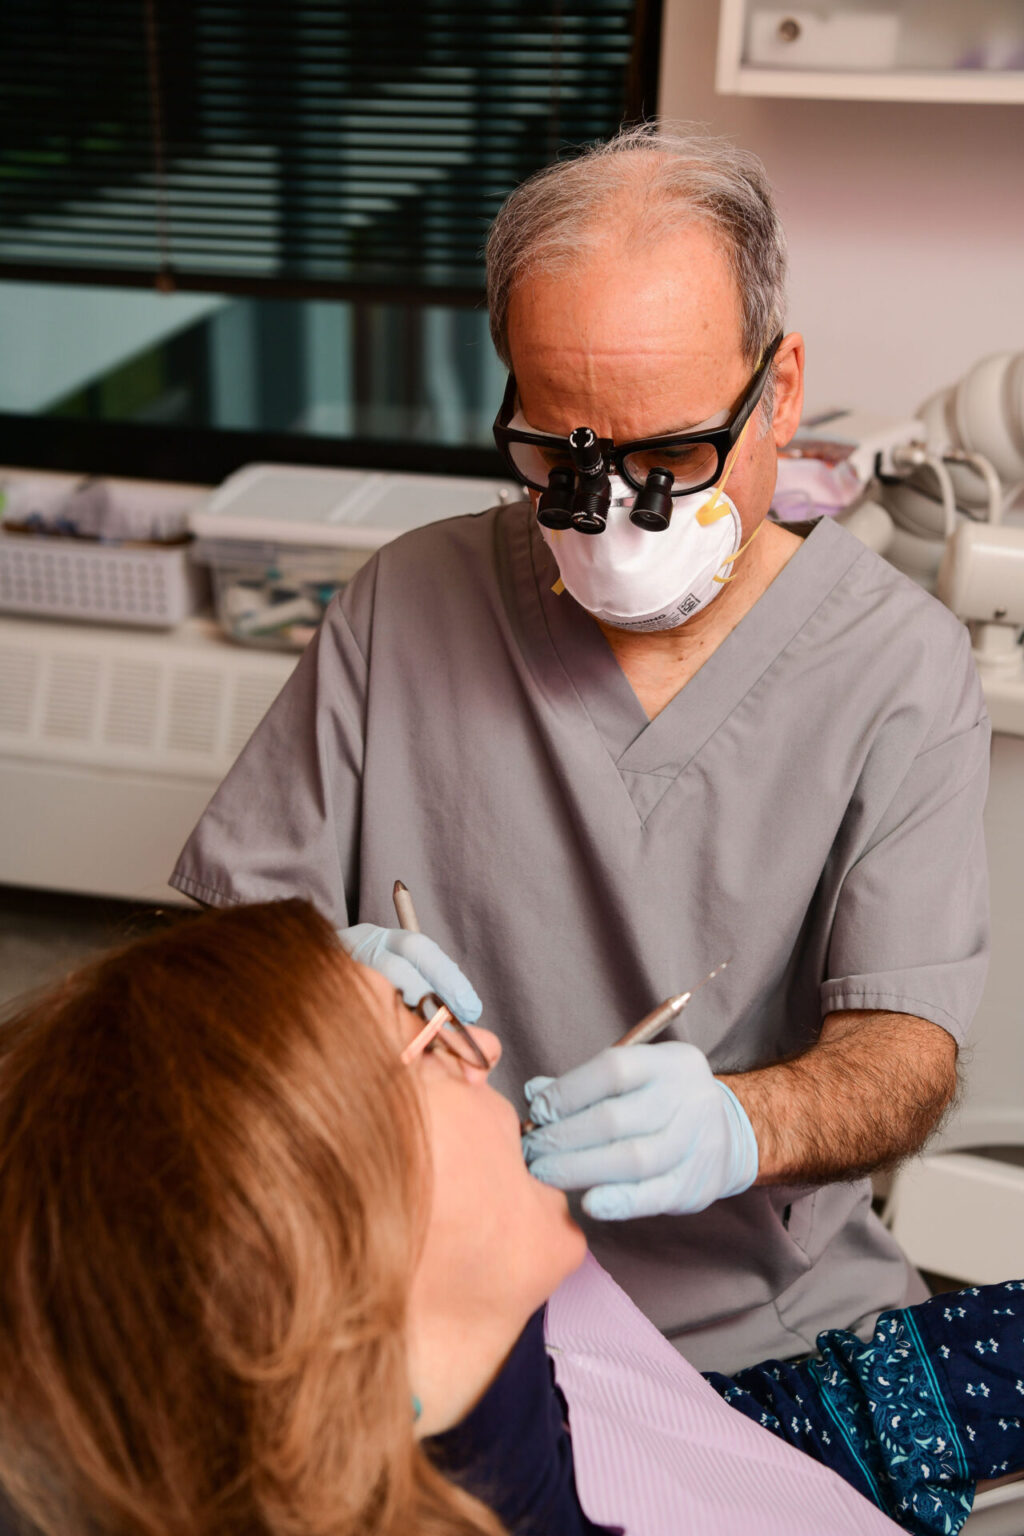 Whether you are interested in Family Dentistry, Root Canal Therapy, or just about anything in between, Dr. Sunners makes sure our patients receive the highest quality care with compassion and comfort.